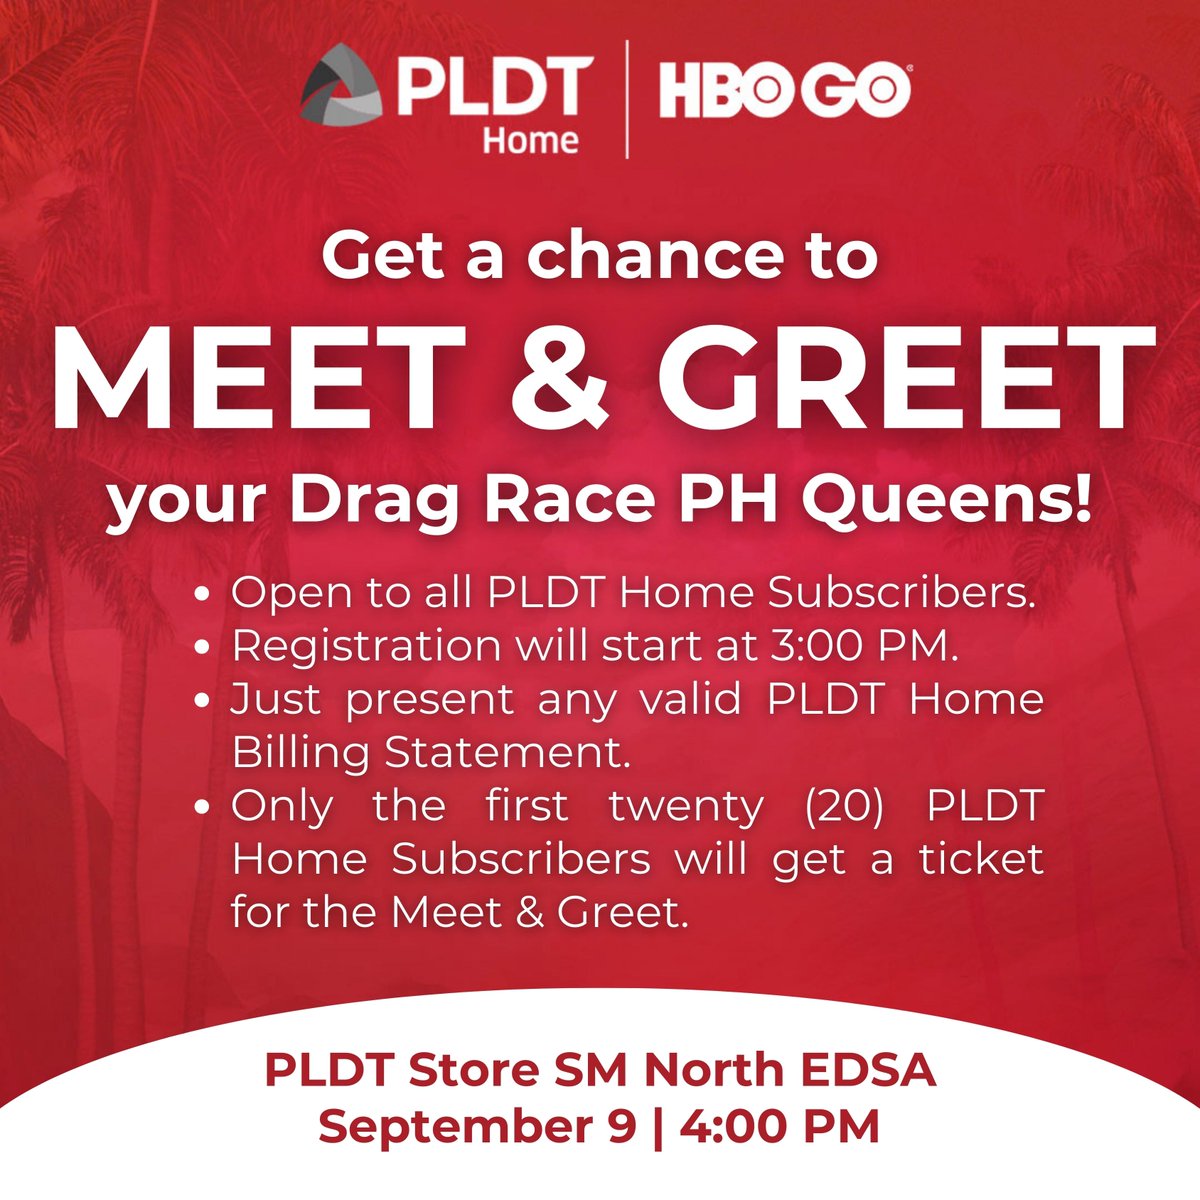 Get up close and personal with our #DragRacePH Queens @matilduh_ @DeeDeeMarieH & @PreciousPaulaN tomorrow, 4 PM at the PLDT Store, 3rd floor SM North Edsa Annex Building! 3/4